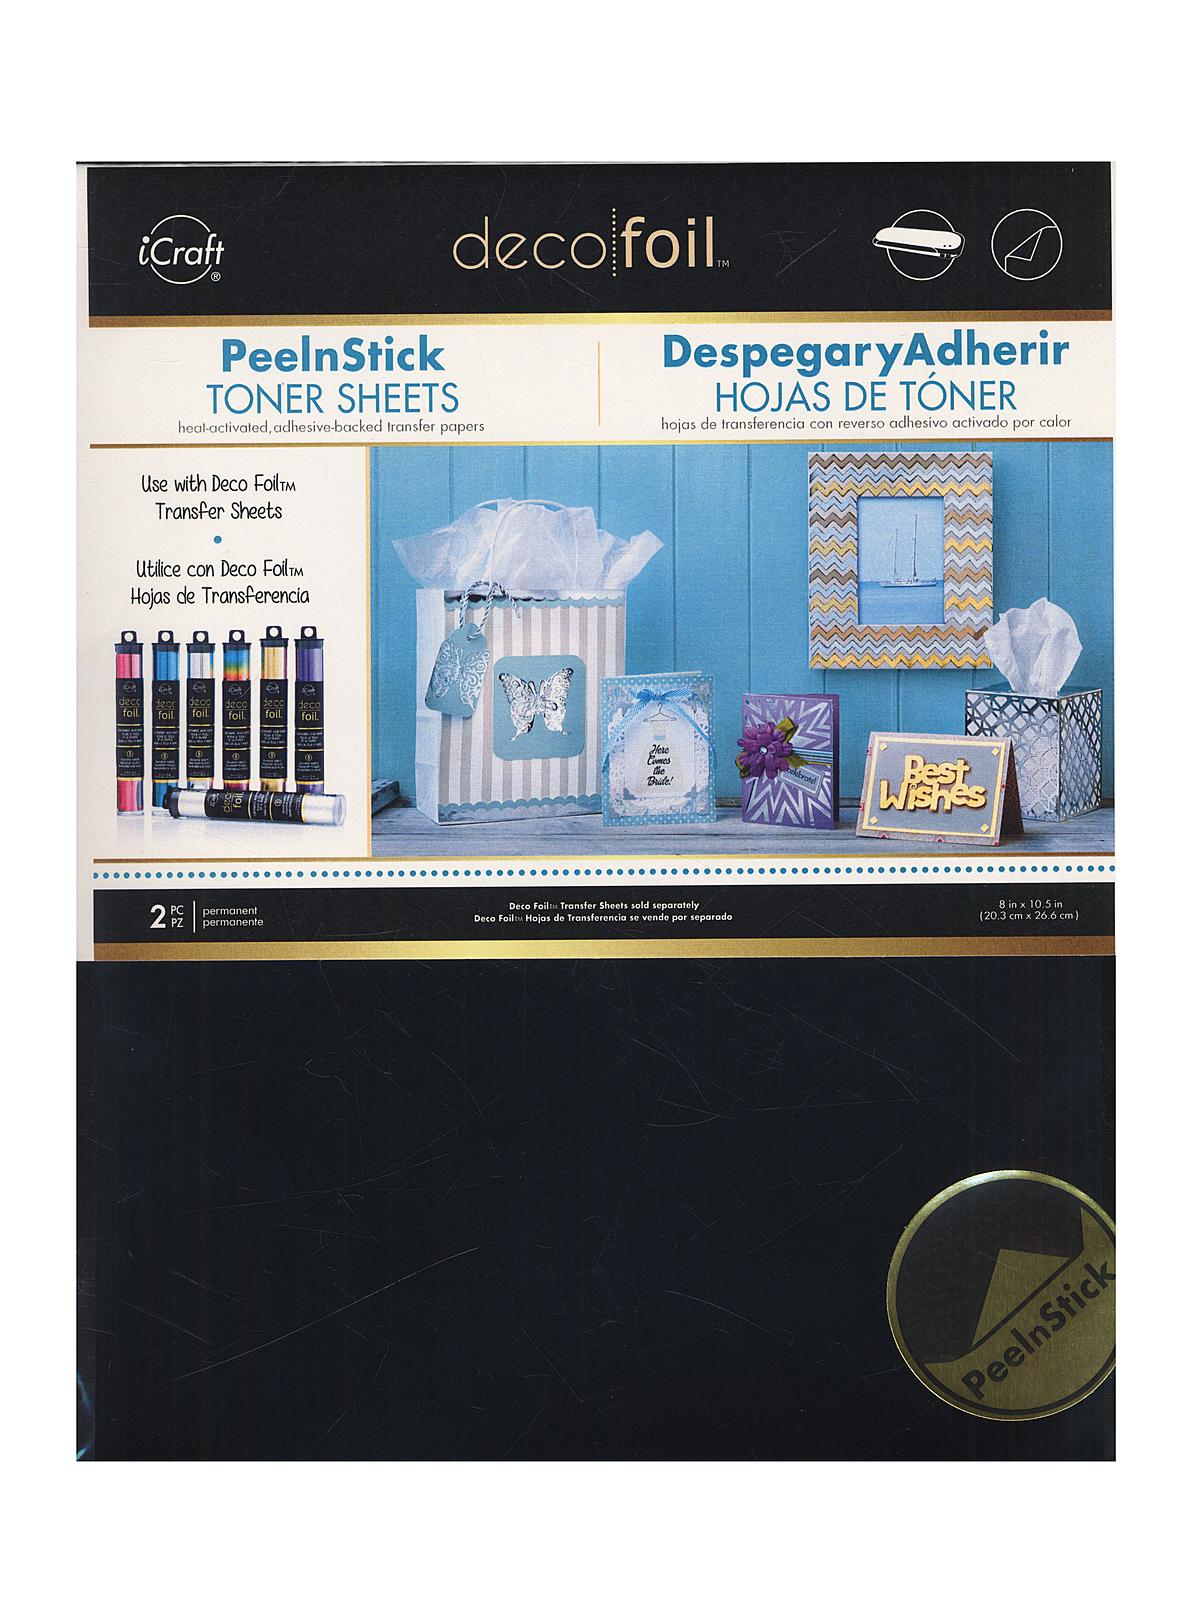 Icraft Deco Foil Toner Sheets Peel N Stick 8 In. X 10 1 2 In. Pack Of 2